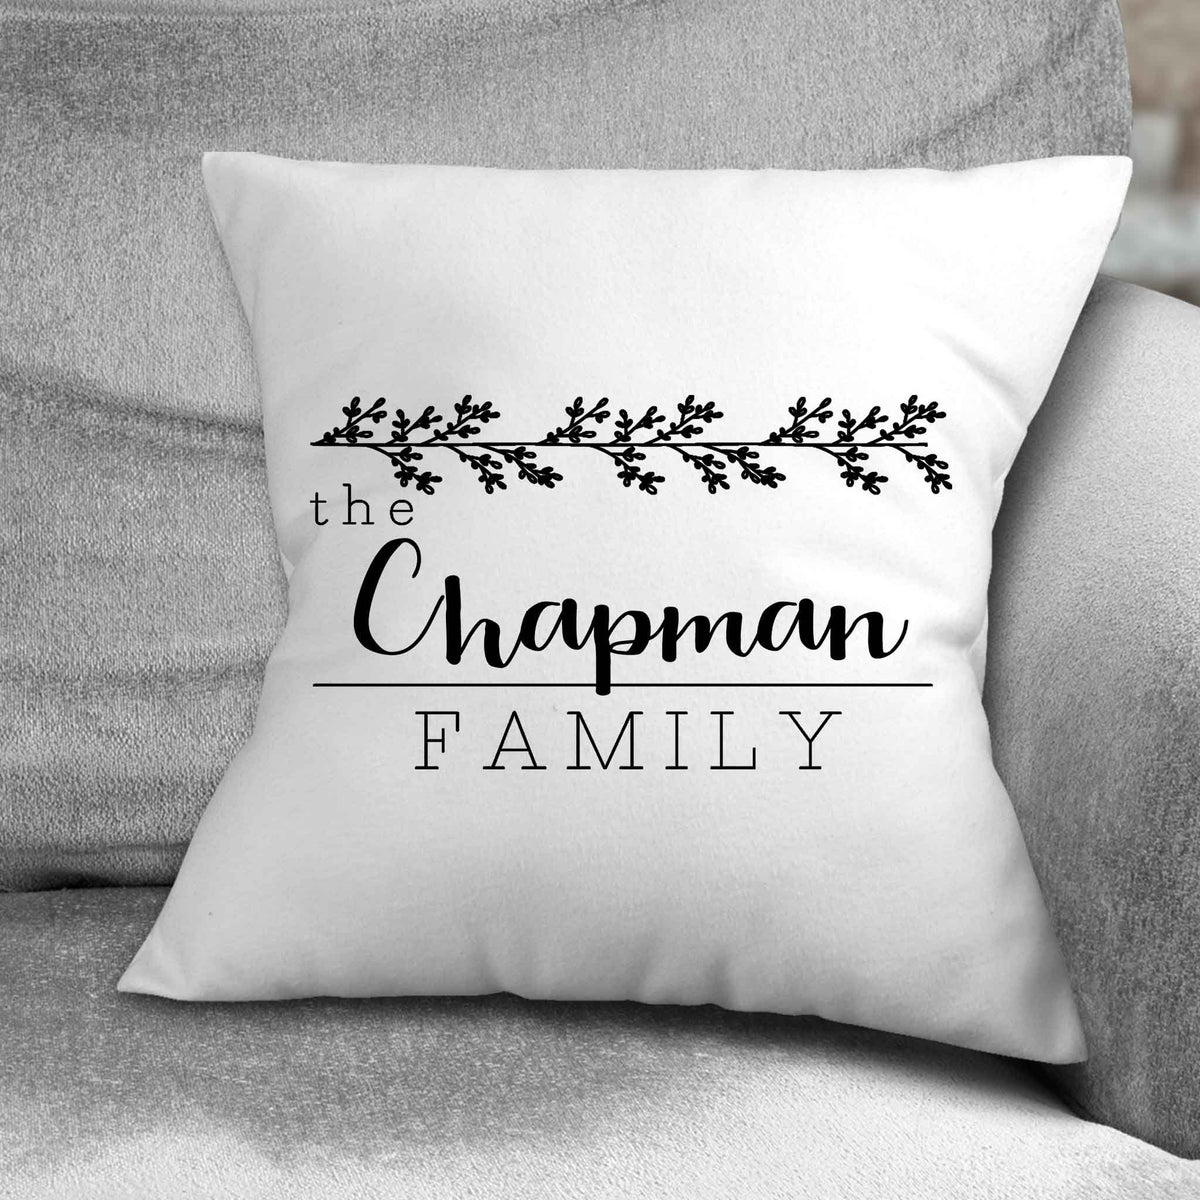 Personalized Throw Pillow | Custom Decorative Pillow | Family Twig